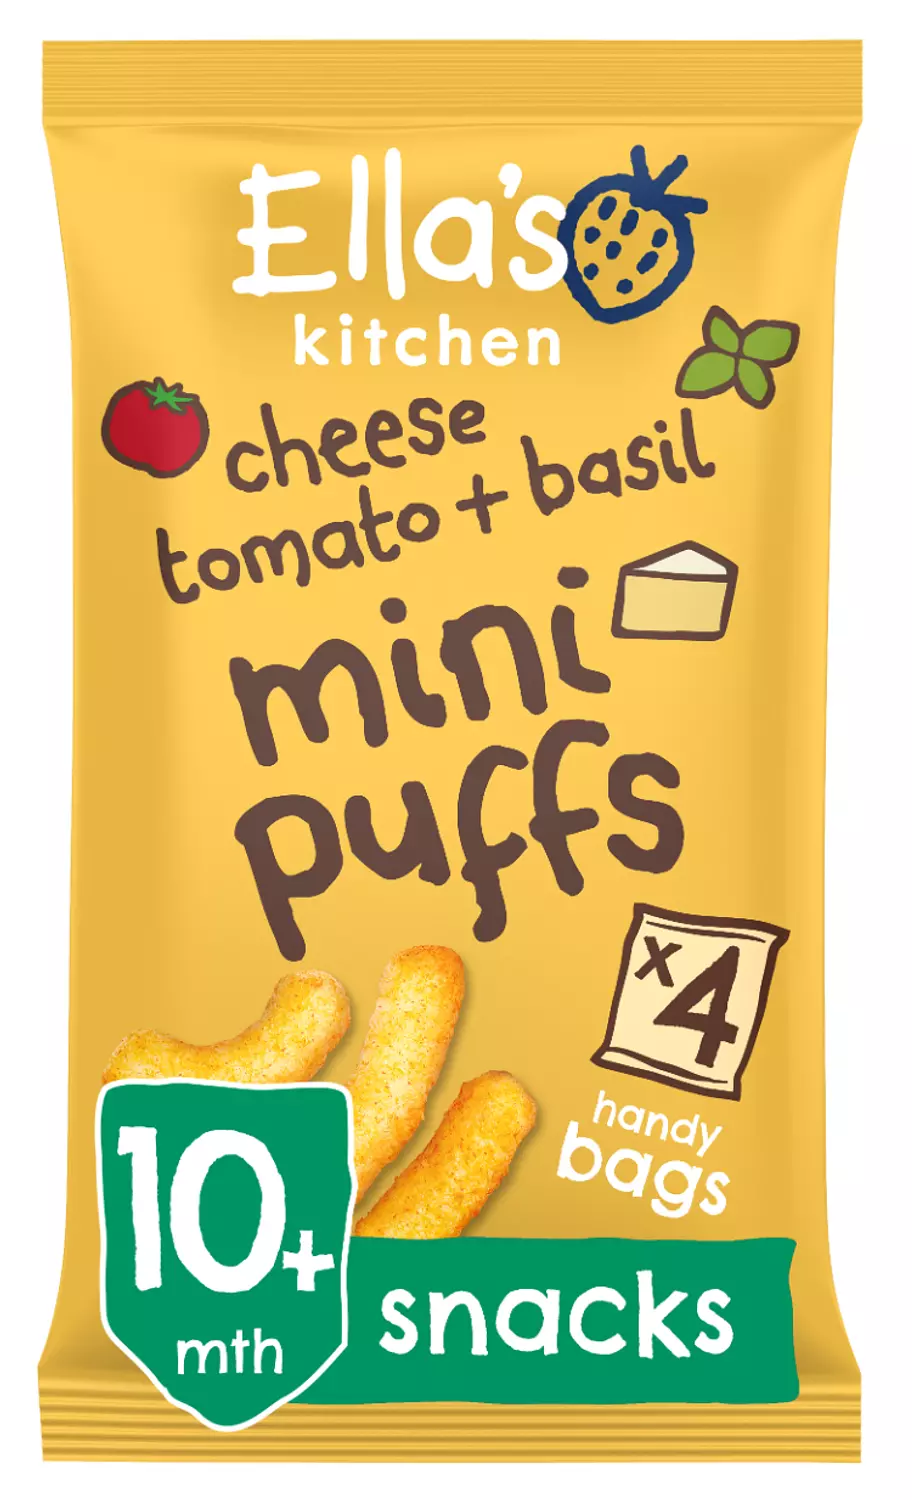 Cheese + Tomato basil puffs - 32 Grams  hover image